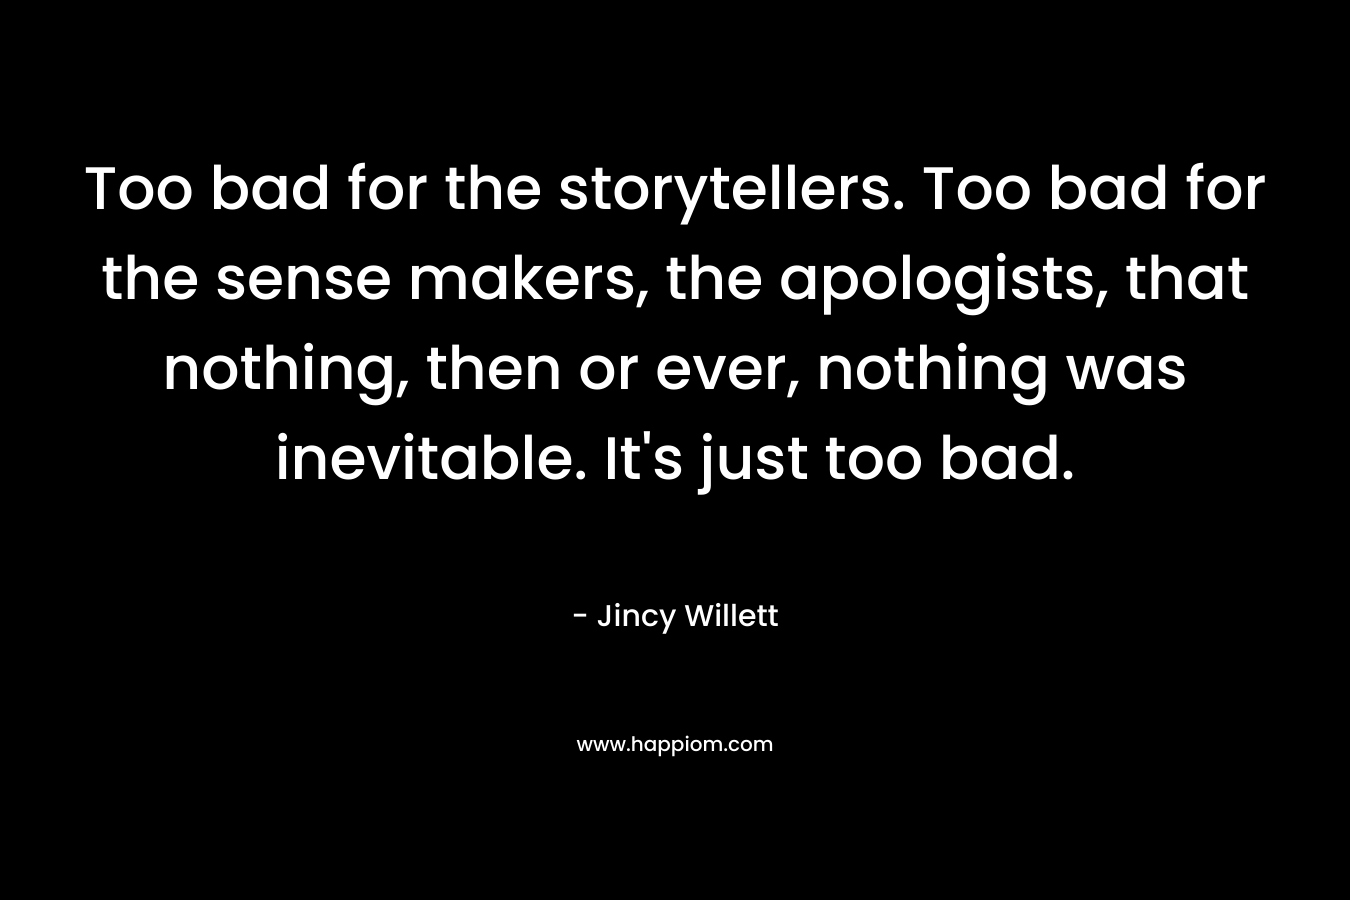 Too bad for the storytellers. Too bad for the sense makers, the apologists, that nothing, then or ever, nothing was inevitable. It's just too bad.